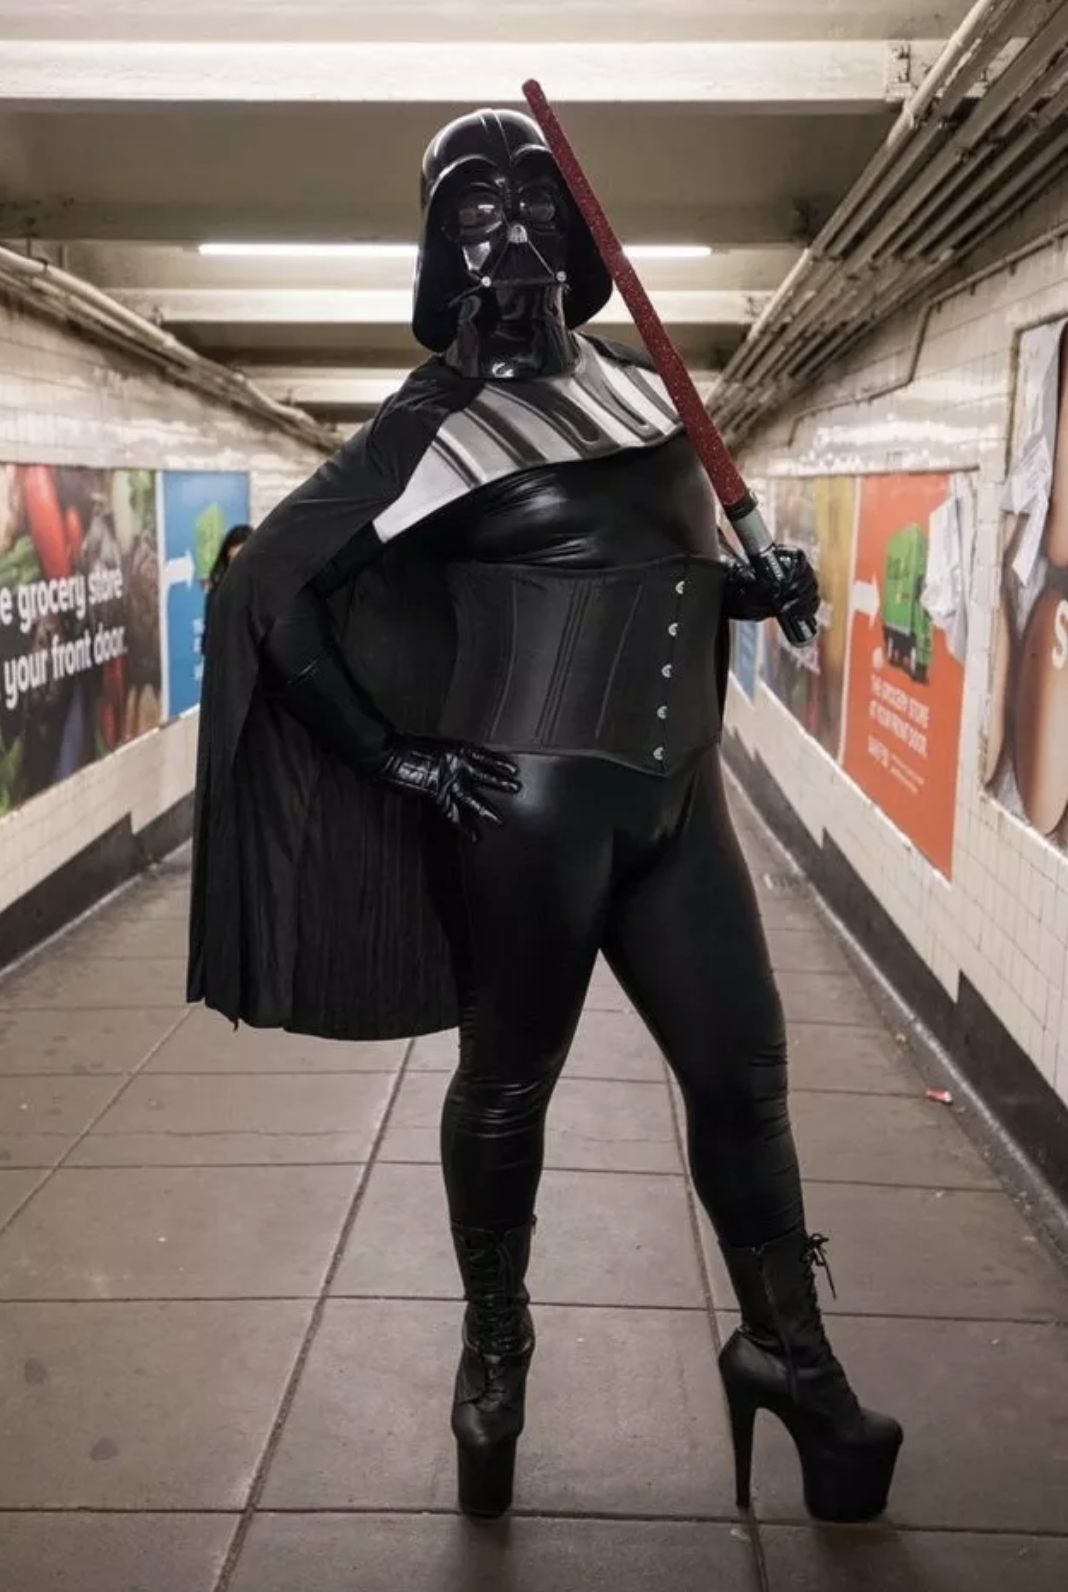 Someone dressed as darth vader in a corset, cape, and high heels